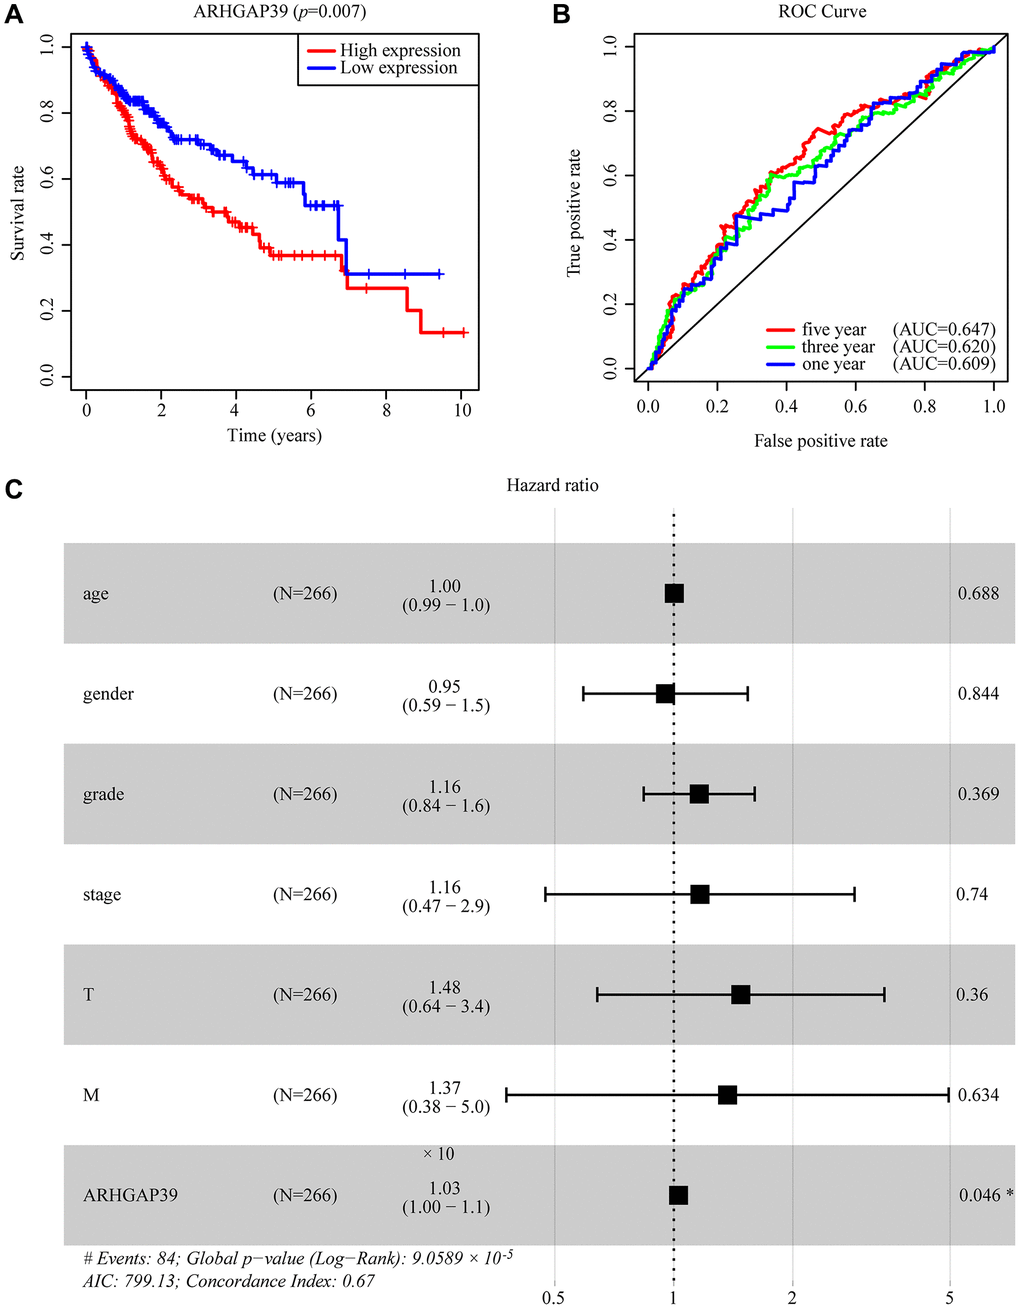 The effectiveness of ARHGAP39 in predicting prognosis. (A) HCC patients with a higher expression level of ARHGAP39 had an unfavorable prognosis (p = 0.007). (B) ROC curves for the 1-, 3-, and 5-year survival according to the expression level of ARHGAP39. AUC, area under the curve; ROC, receiver operating characteristic. (C) A forest plot of the results of the multivariate analysis. *p **p ***p 